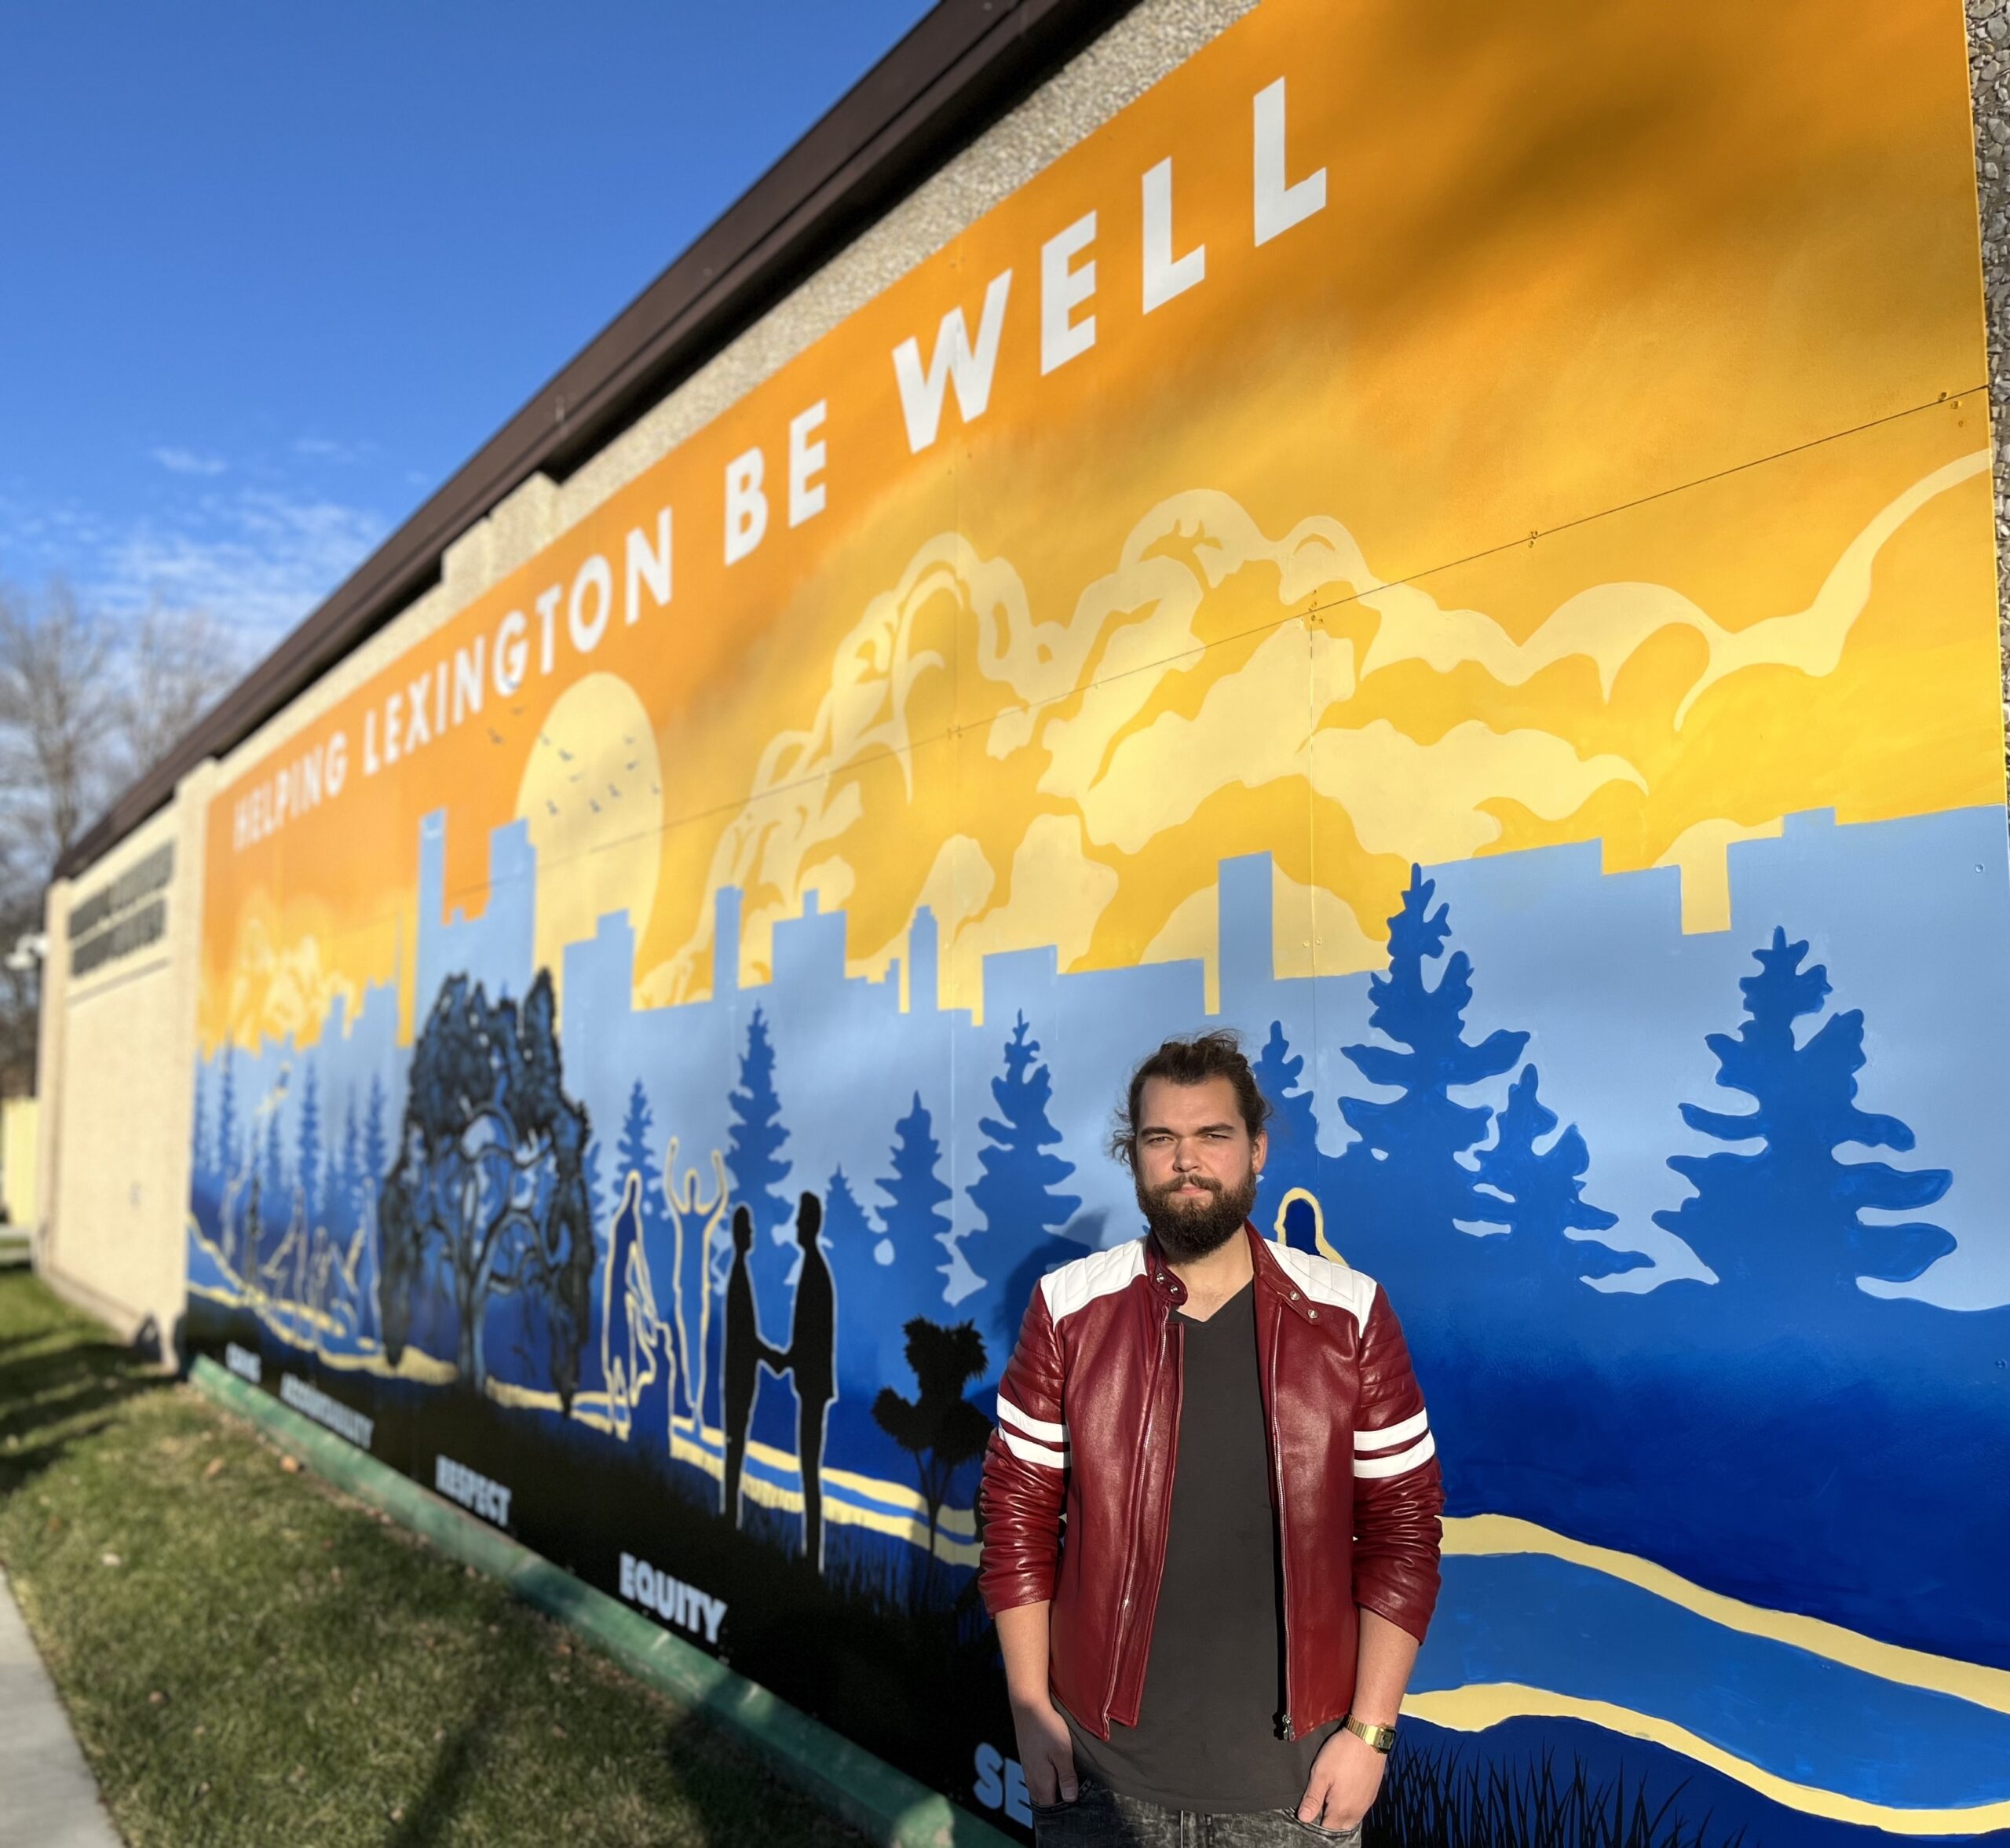 LFCHD unveils new mural at 650 Newtown Pike